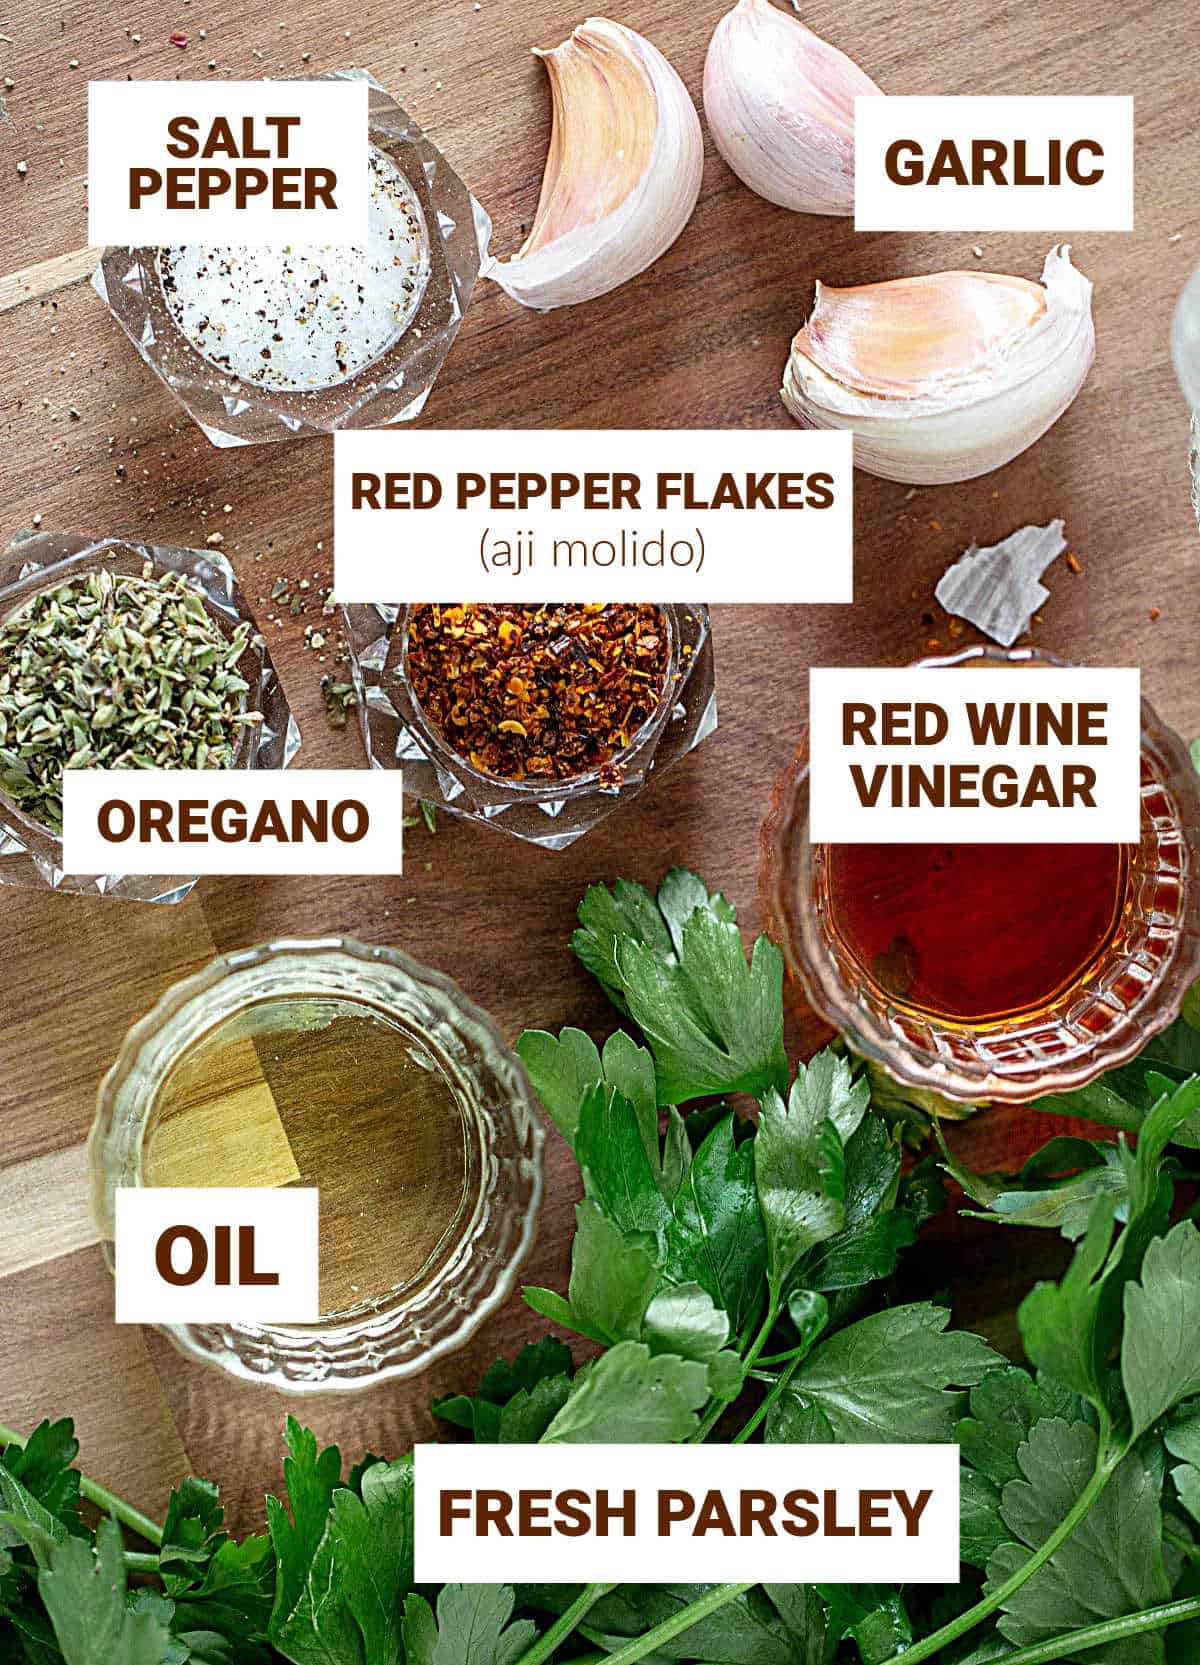 Garlic cloves, fresh parsley and rest of chimichurri ingredients in small bowls on wooden board, text overlay.